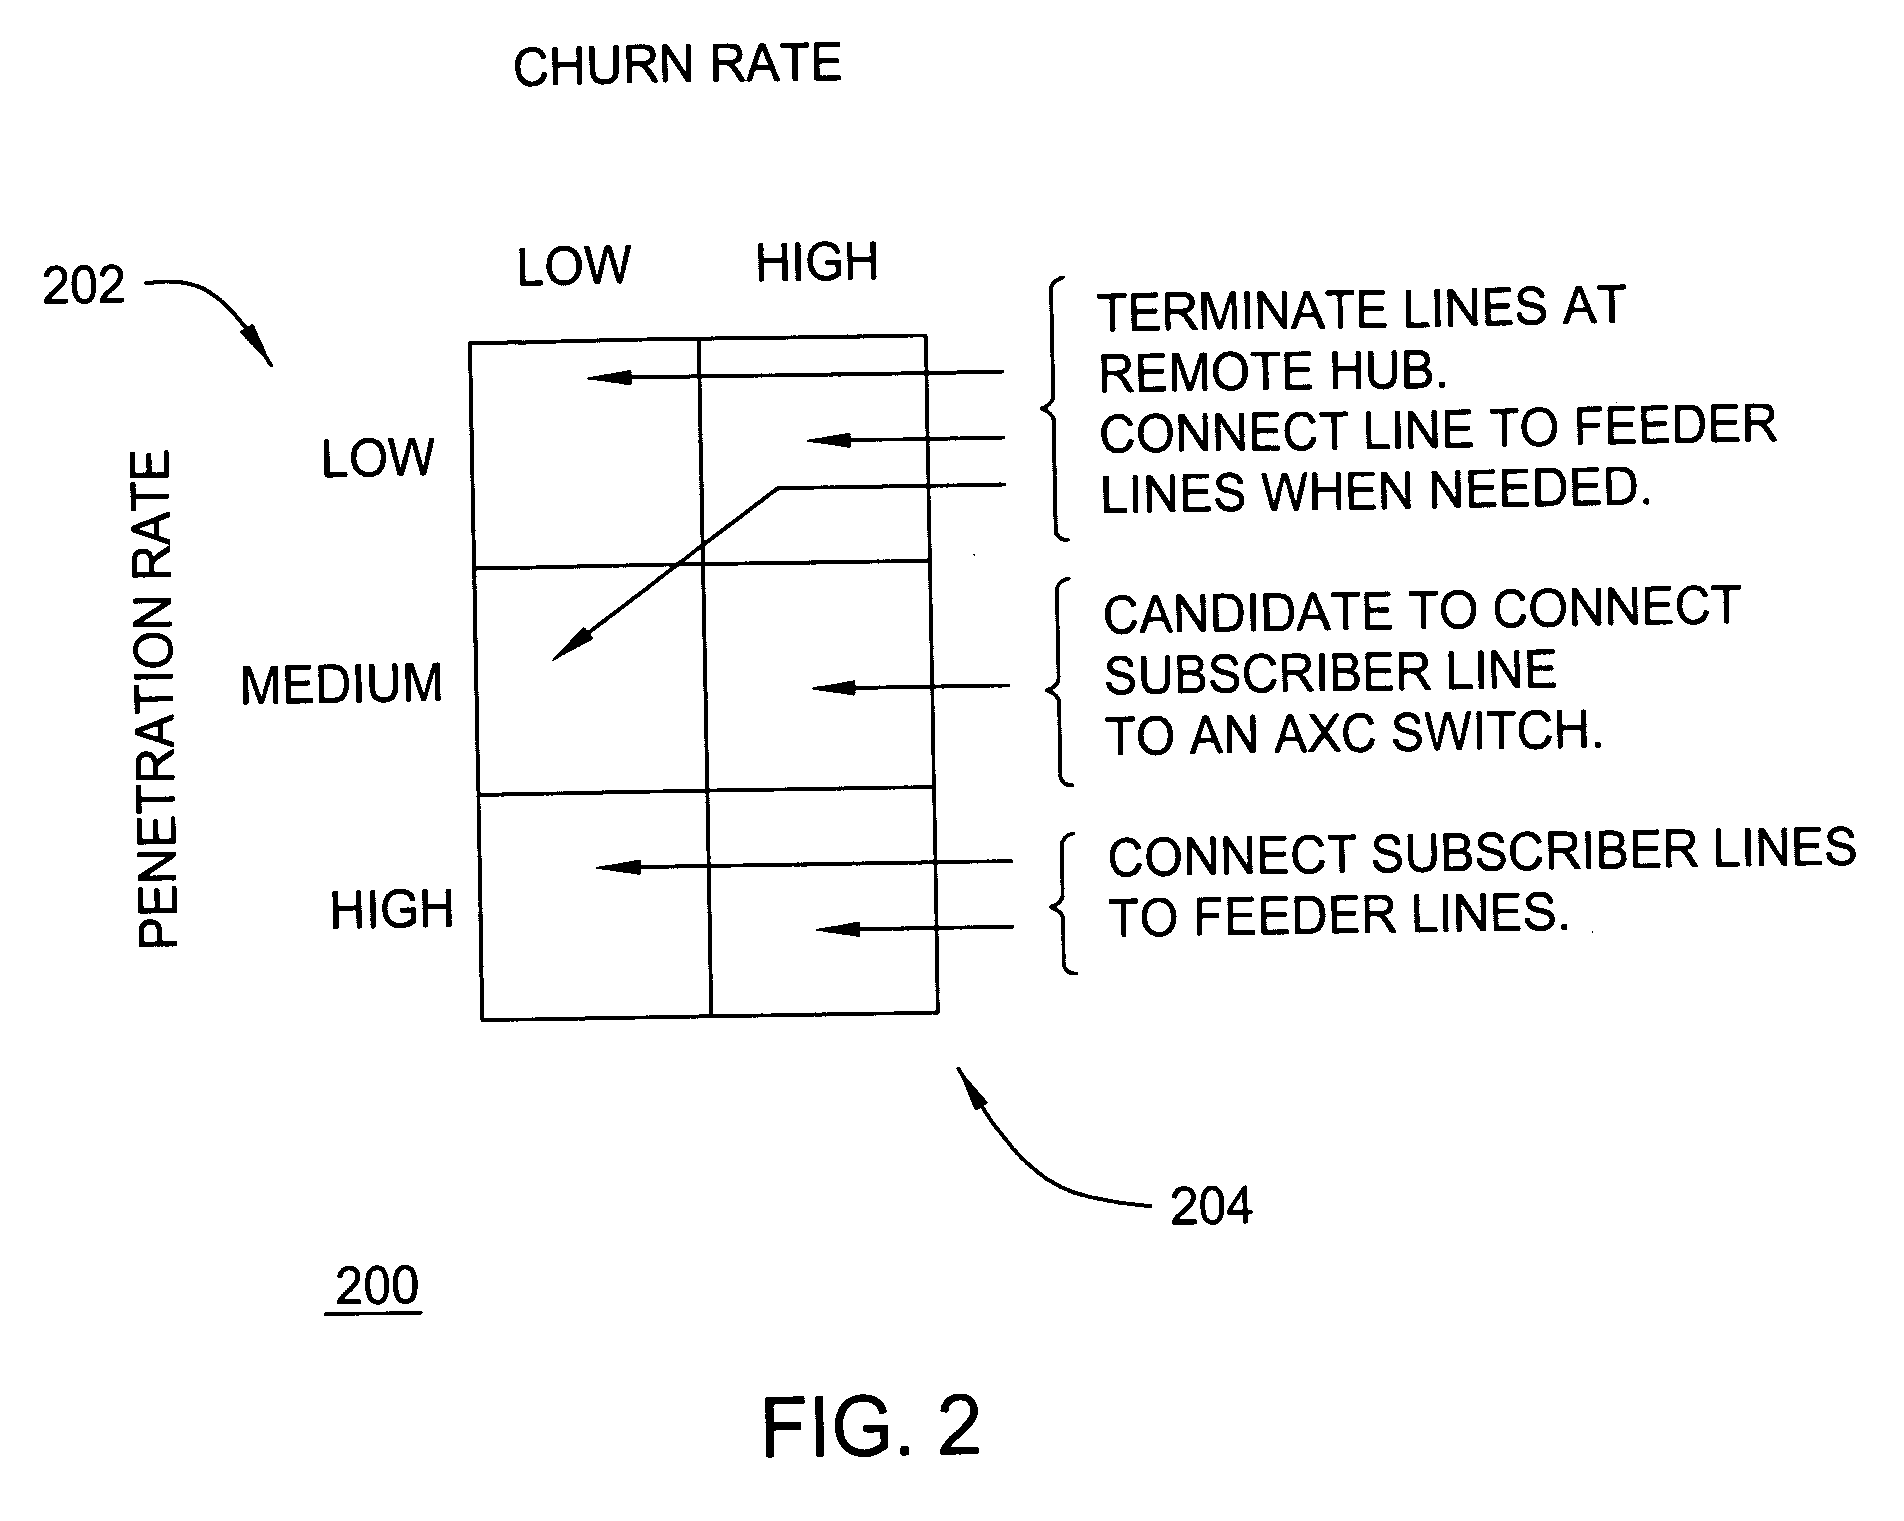 Apparatus for decomposing an automatic cross connect system at a remote wiring hub